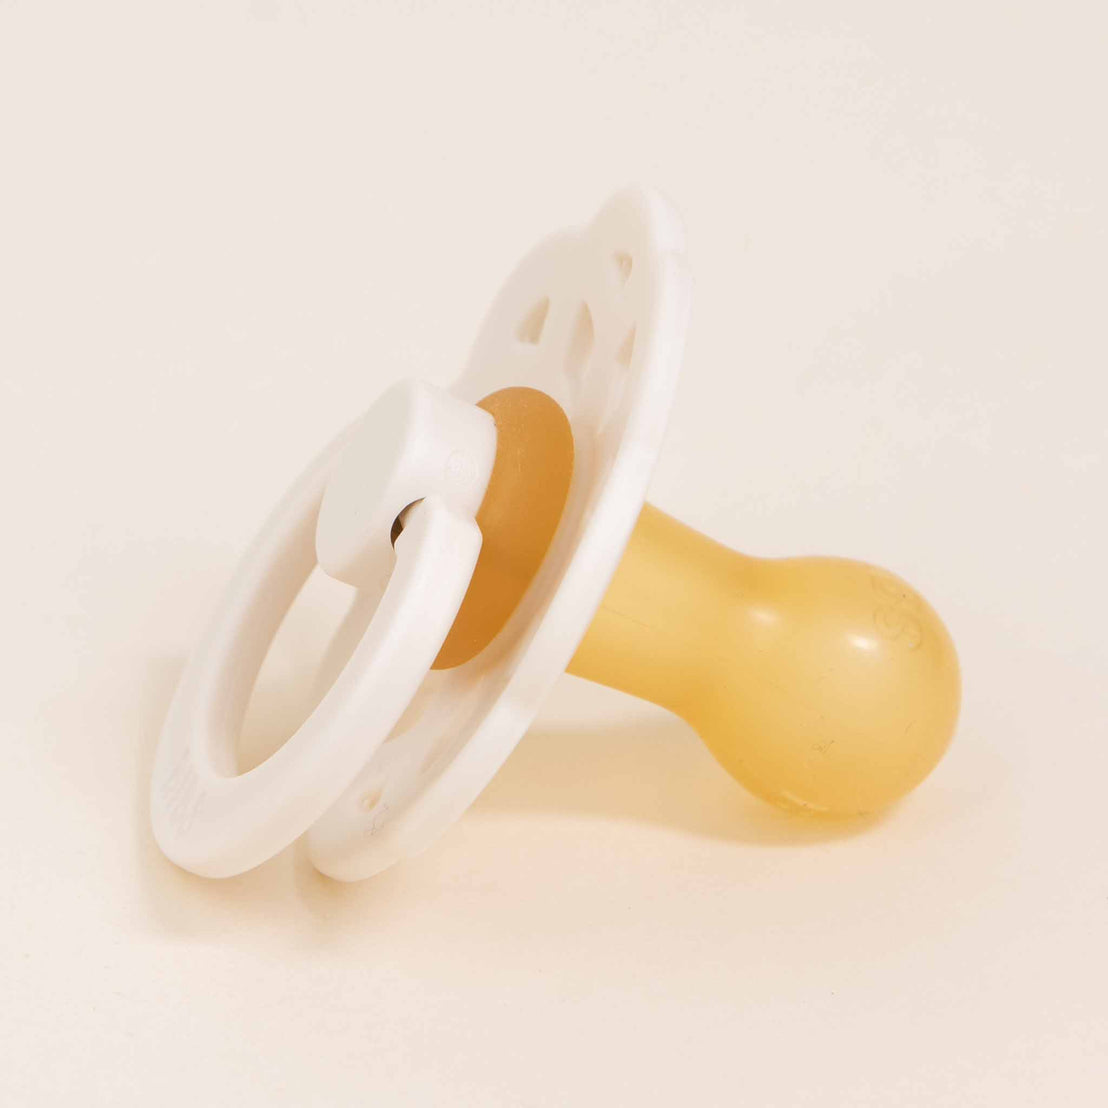 A Bibs Lace Pacifier 2 Pack | Ivory with a yellow nipple and white handle, designed in Denmark, set against a soft beige background.